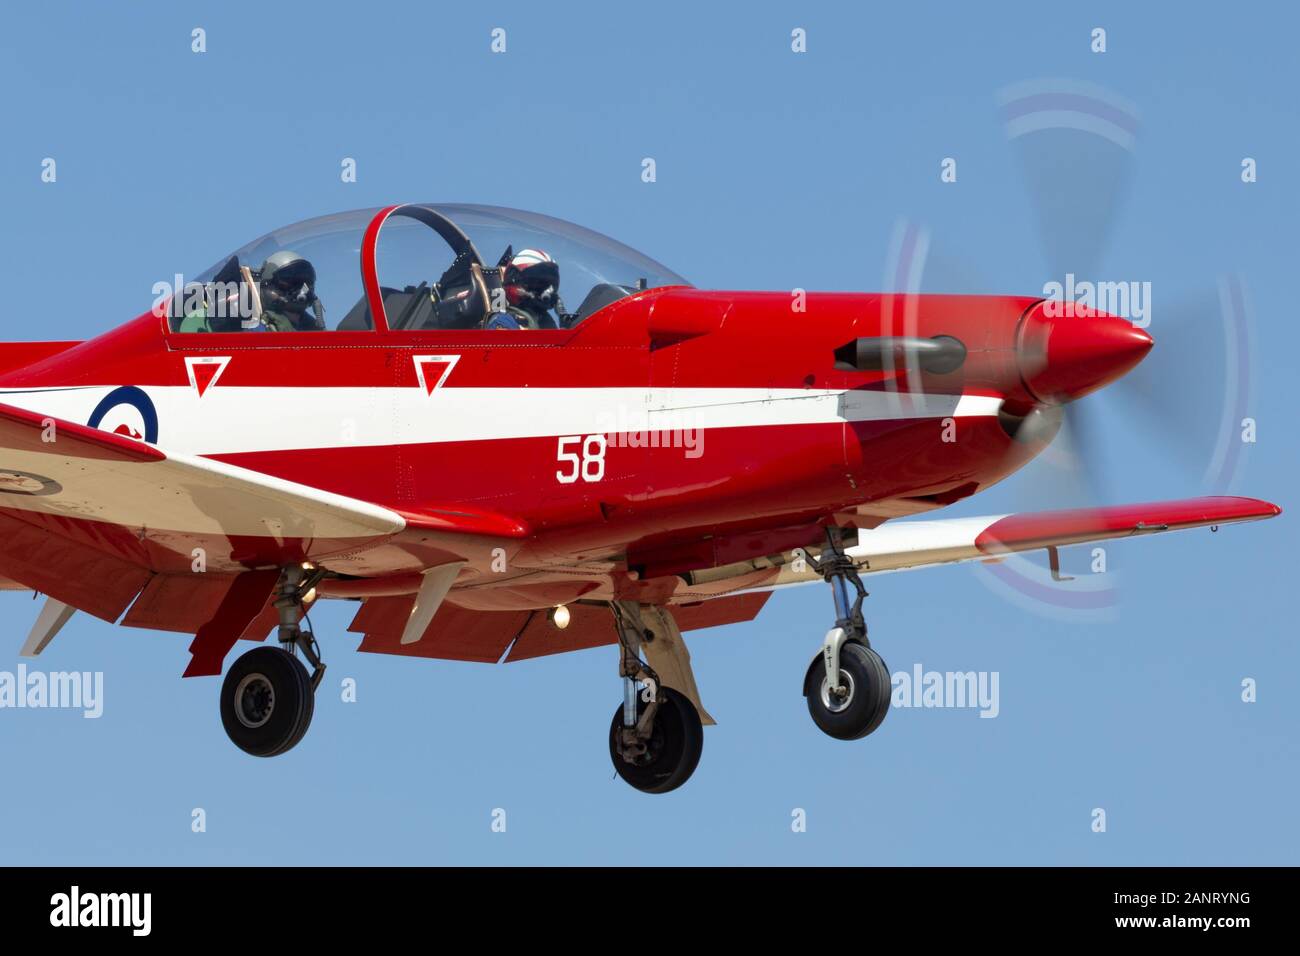 Pilatus PC-9A Trainer aircraft A23-058 from the Royal Australian Air Force (RAAF) Roulettes formation aerobatic display team. Stock Photo